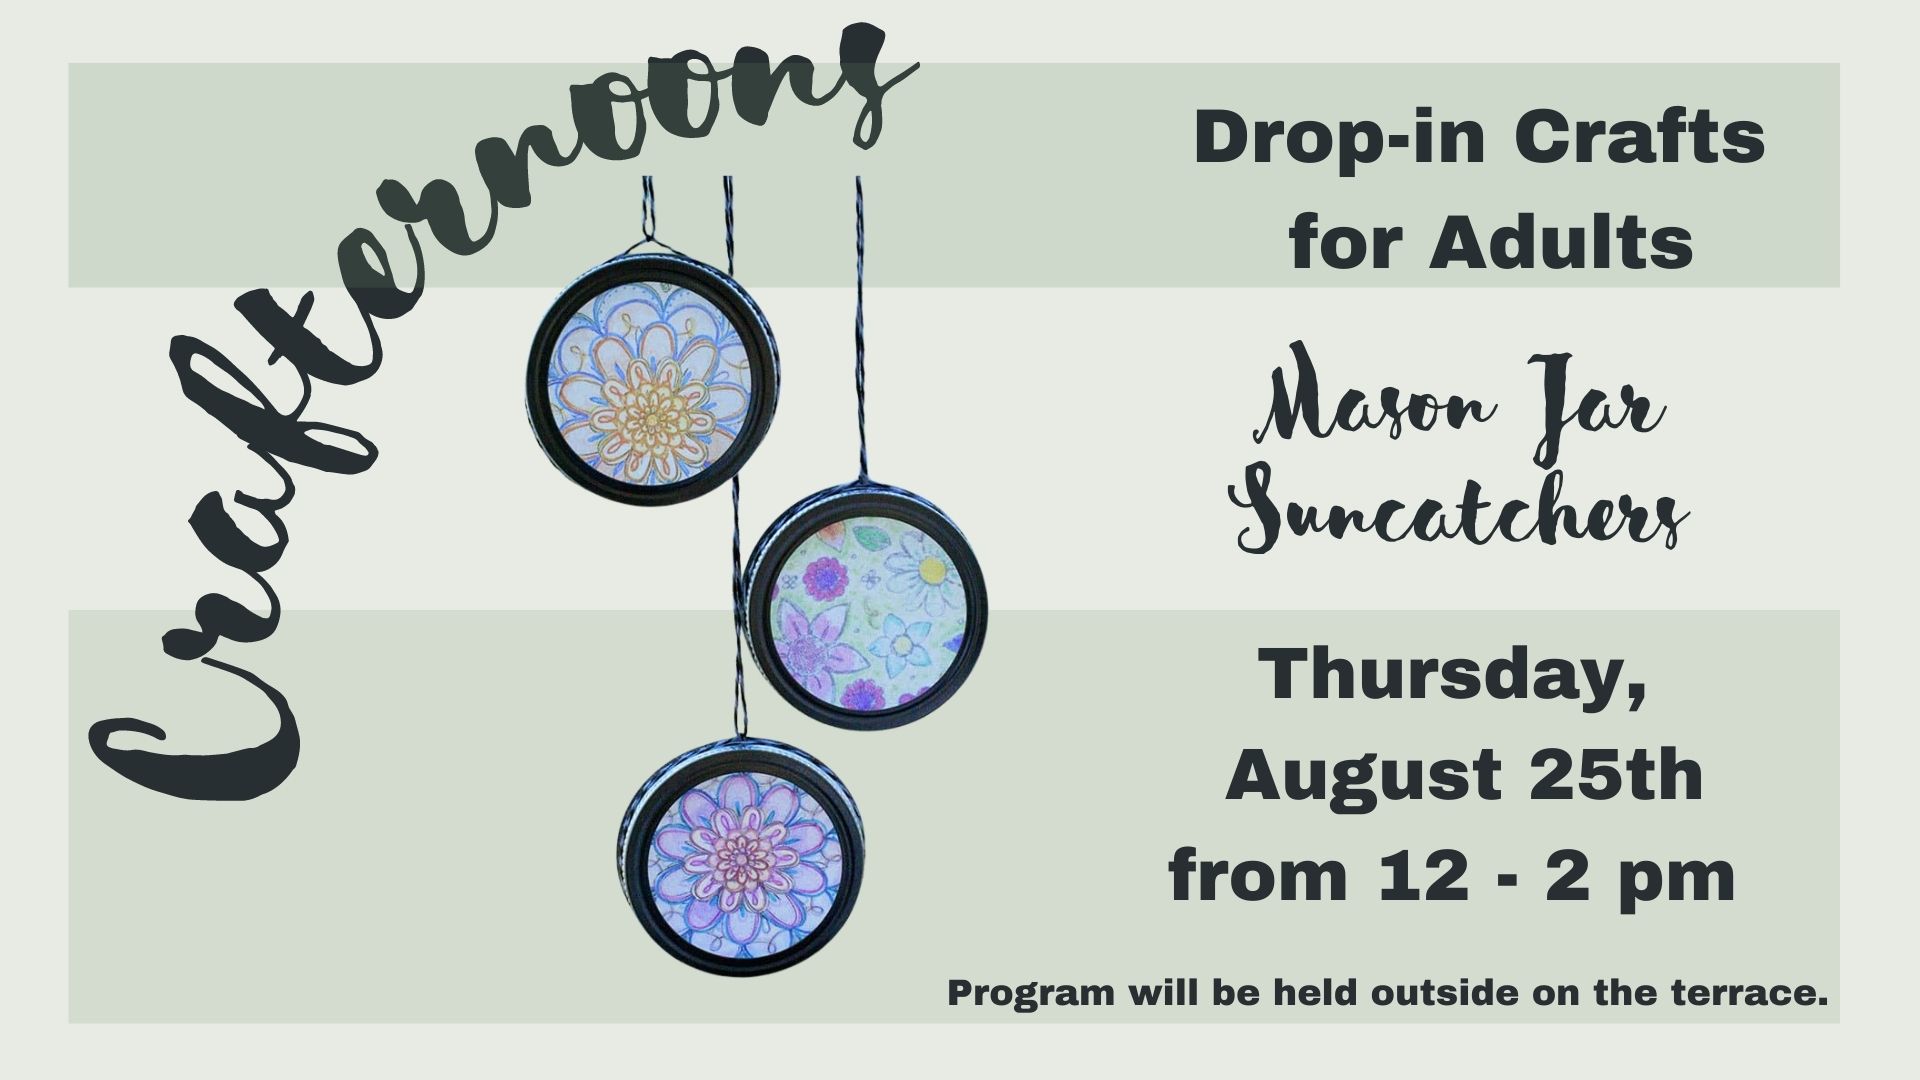 Suncatchers image - Crafternoon on 8/25 from 12-2 pm